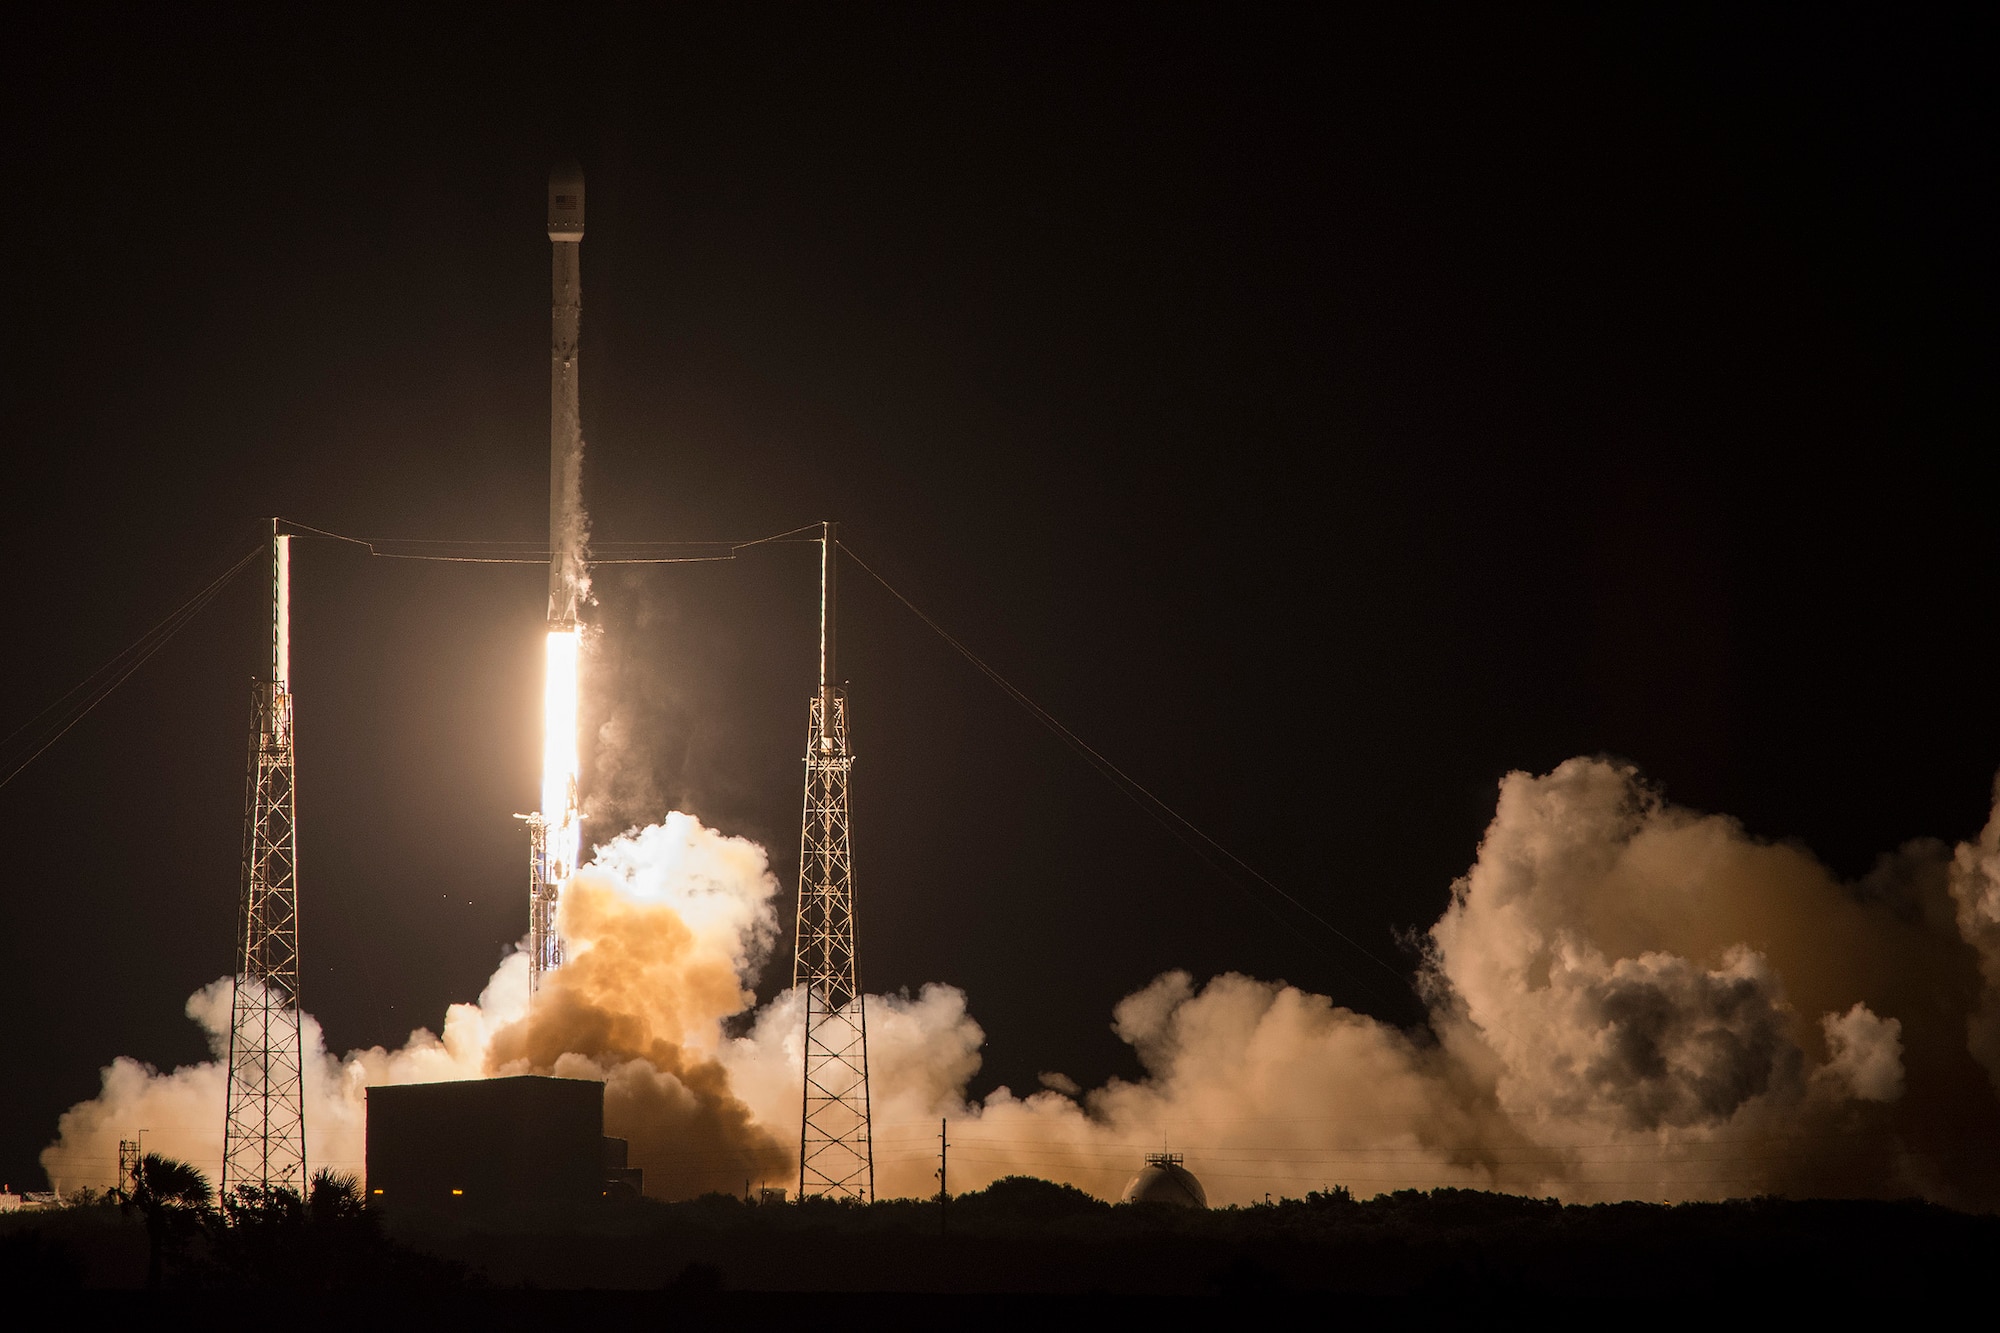 The U.S. Air Force's 45th Space Wing supported the successful SpaceX Falcon 9 JCSAT-14 launch May 6 at 1:21 a.m. EDT from Launch Complex 40 here. JCSAT-14 is a communications satellite designed and manufactured by Space Systems/Loral for SKY Perfect JSAT Corporation based in Tokyo, Japan.  The satellite is designed to provide TV programming and broadband services in Japan, Asia, Oceania, Russia and the Pacific region for at least 15 years, replacing an older satellite called JCSAT-2A. (Courtesy photo by SpaceX)
